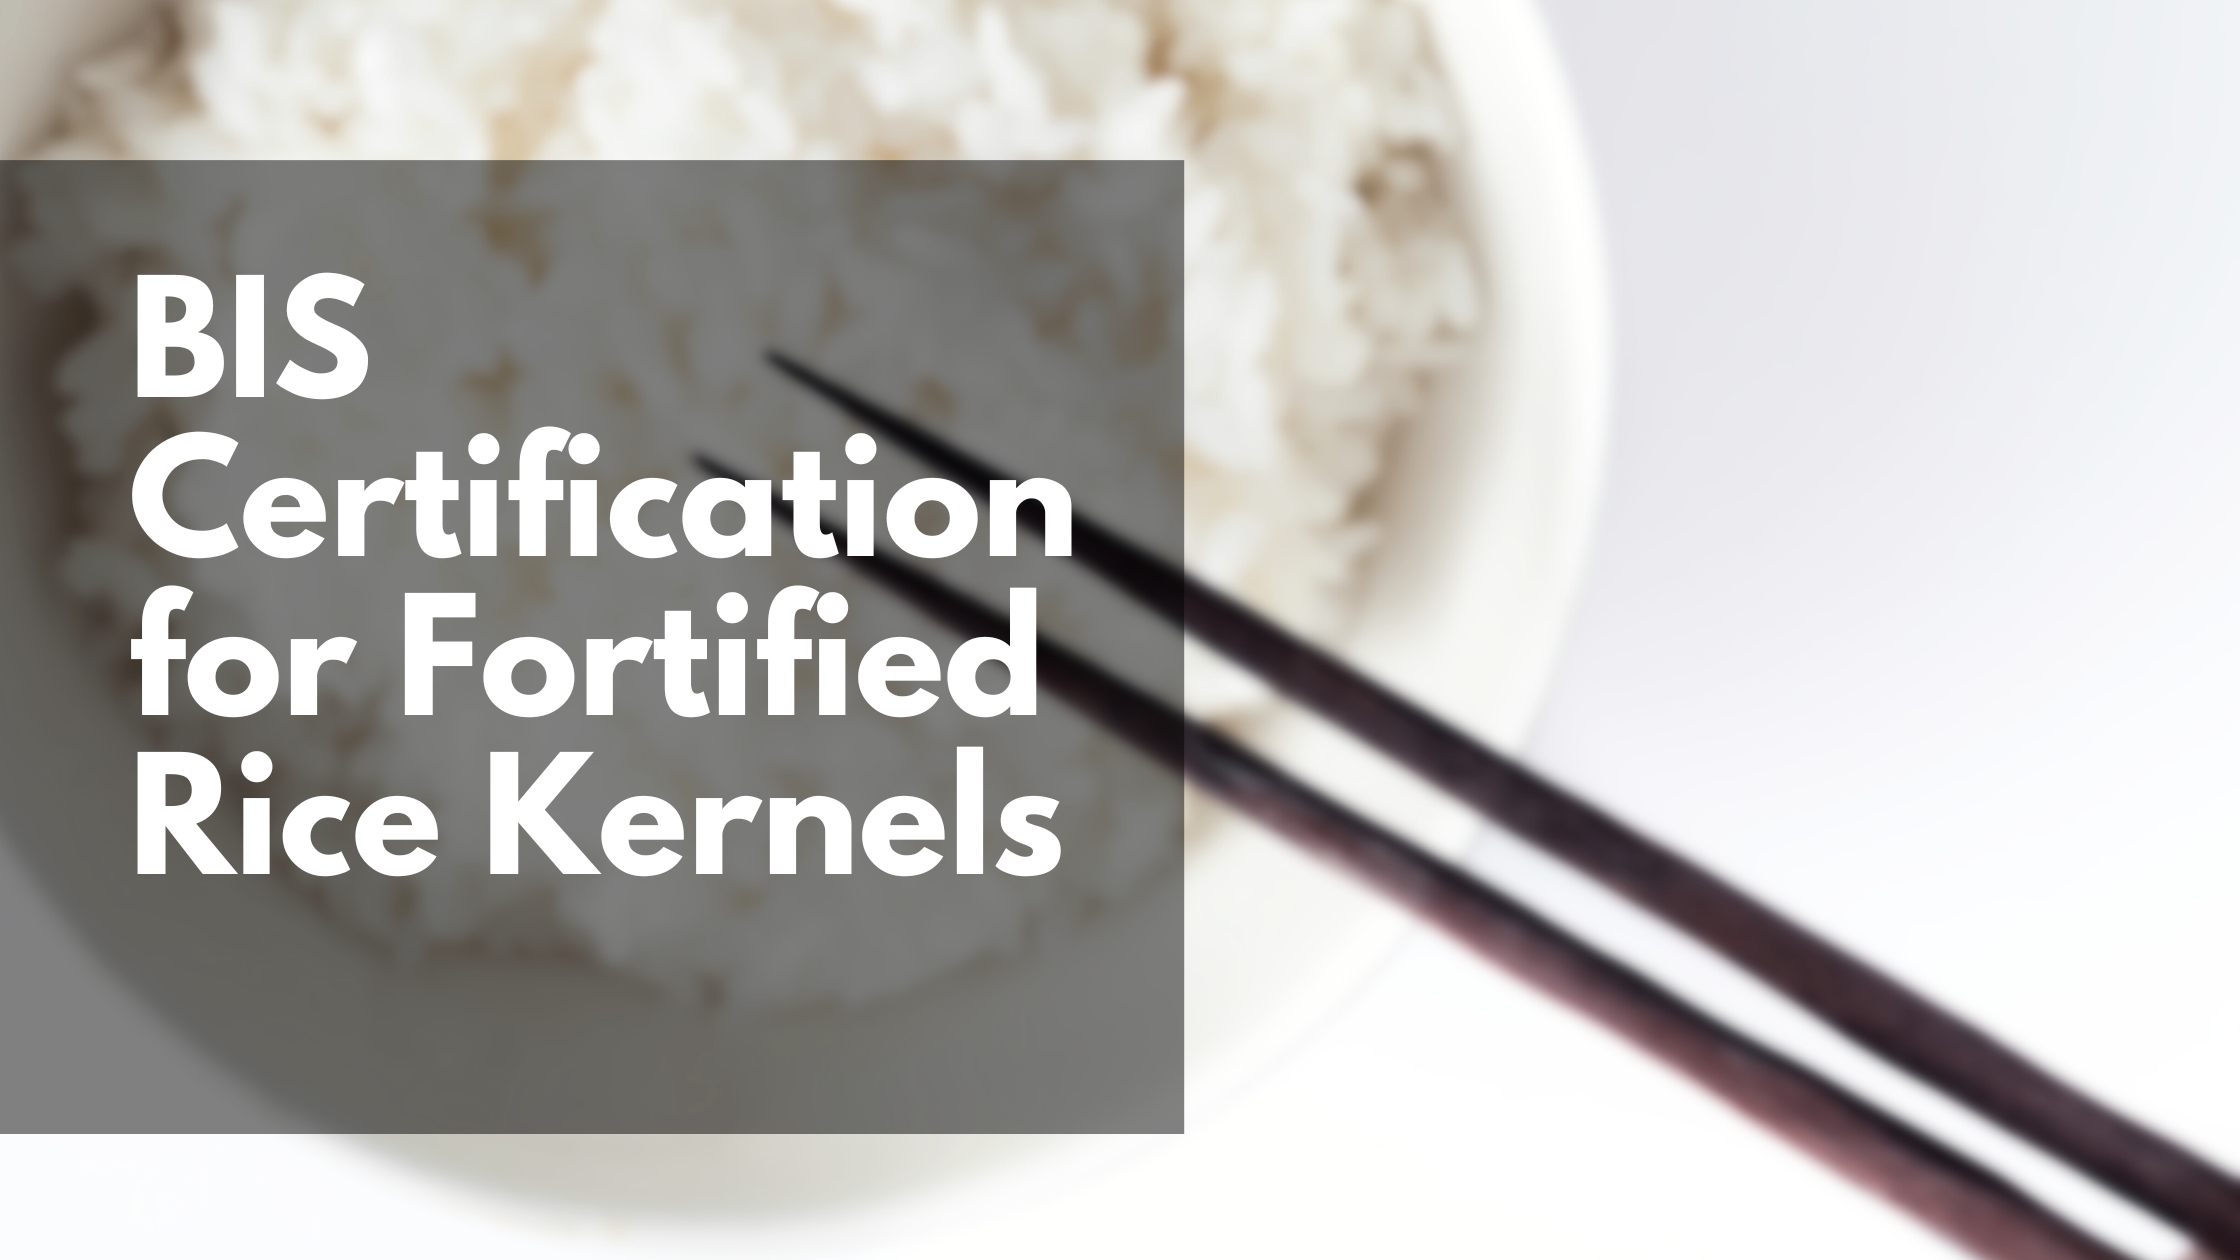 BIS Certification for Fortified Rice Kernels